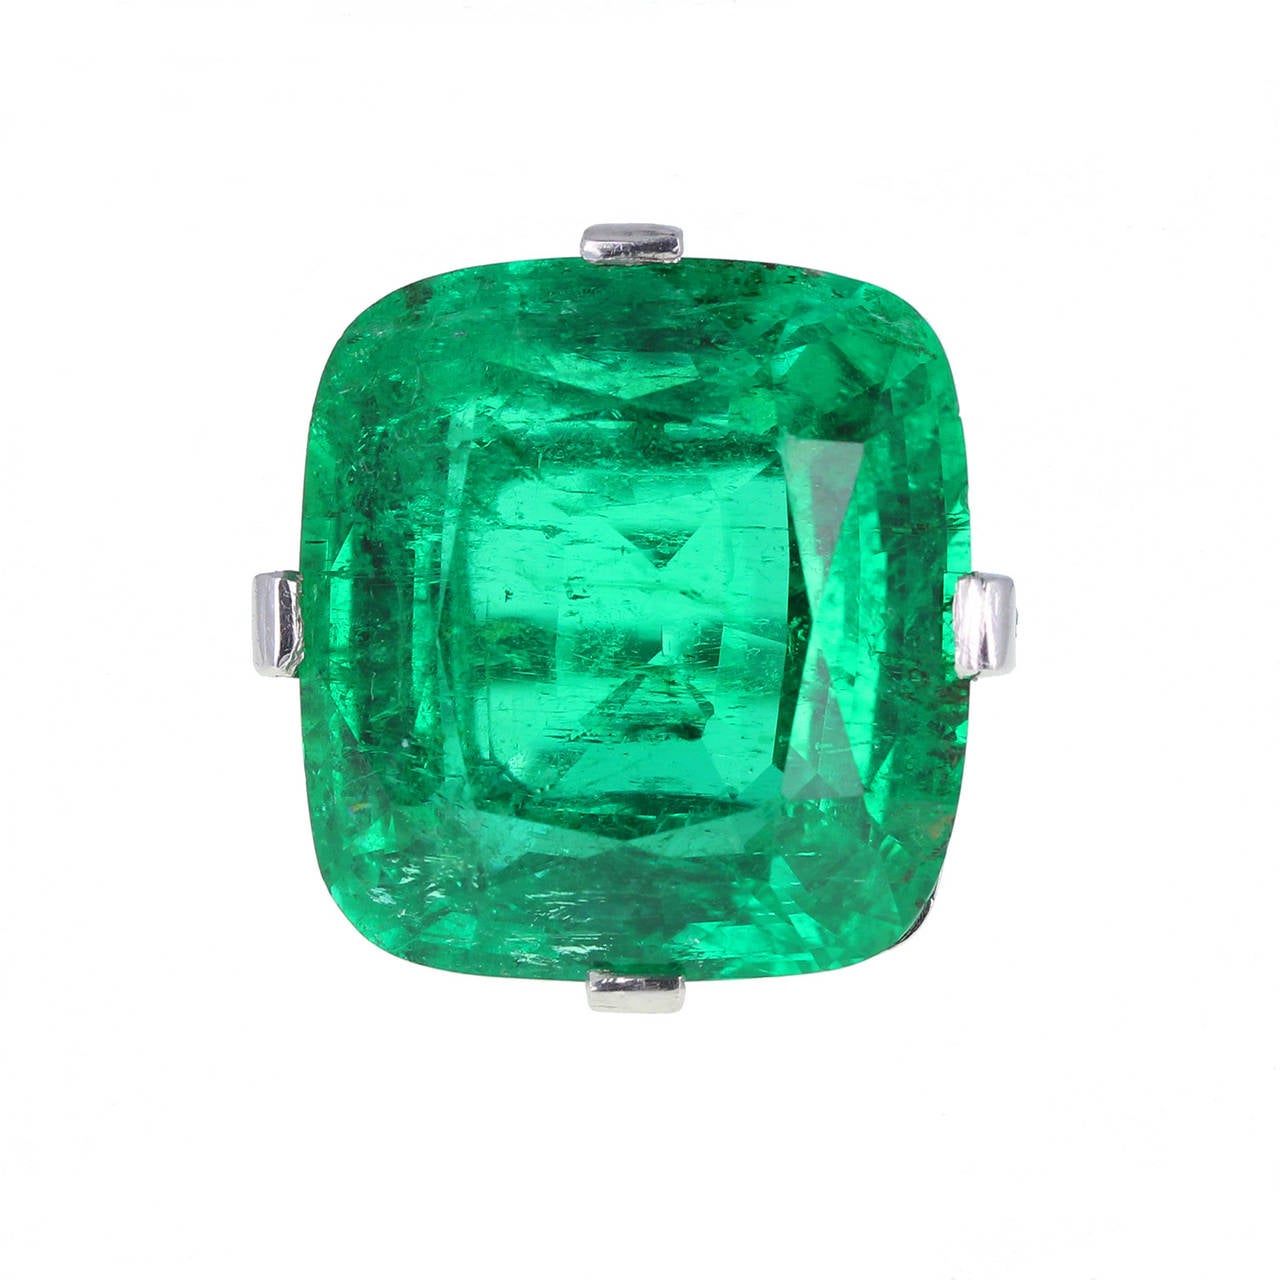 Bold and magnificent, this rampant Art Deco cocktail ring by Cartier Paris features a massive 30.00 carat cushion-cut emerald of exceptional colour that we have found difficult to capture in our images. Independently certificated by SSEF, the world